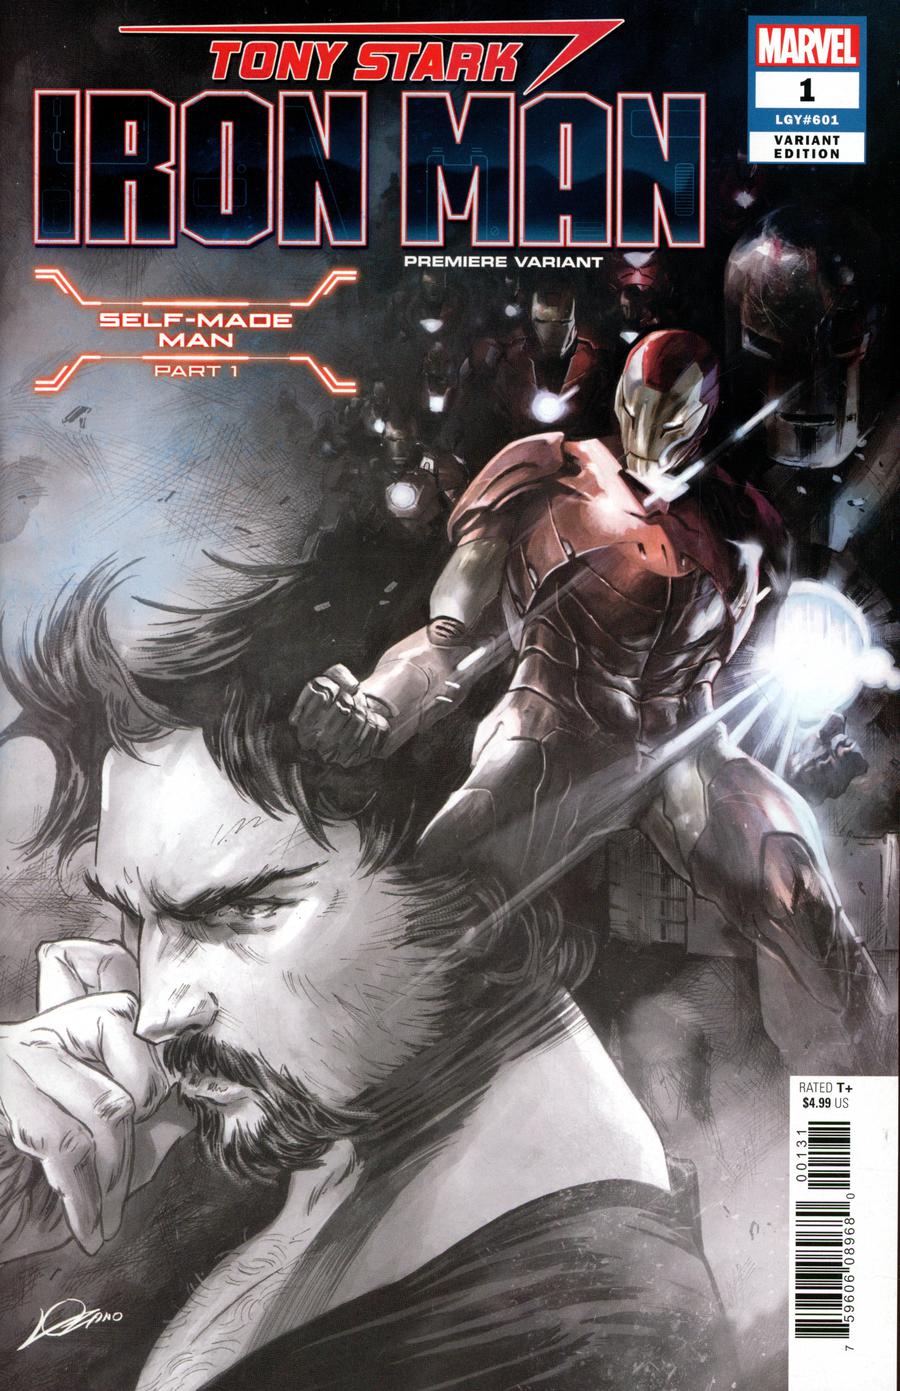 Tony Stark Iron Man #1 Cover Z-A Incentive Premiere Variant Cover